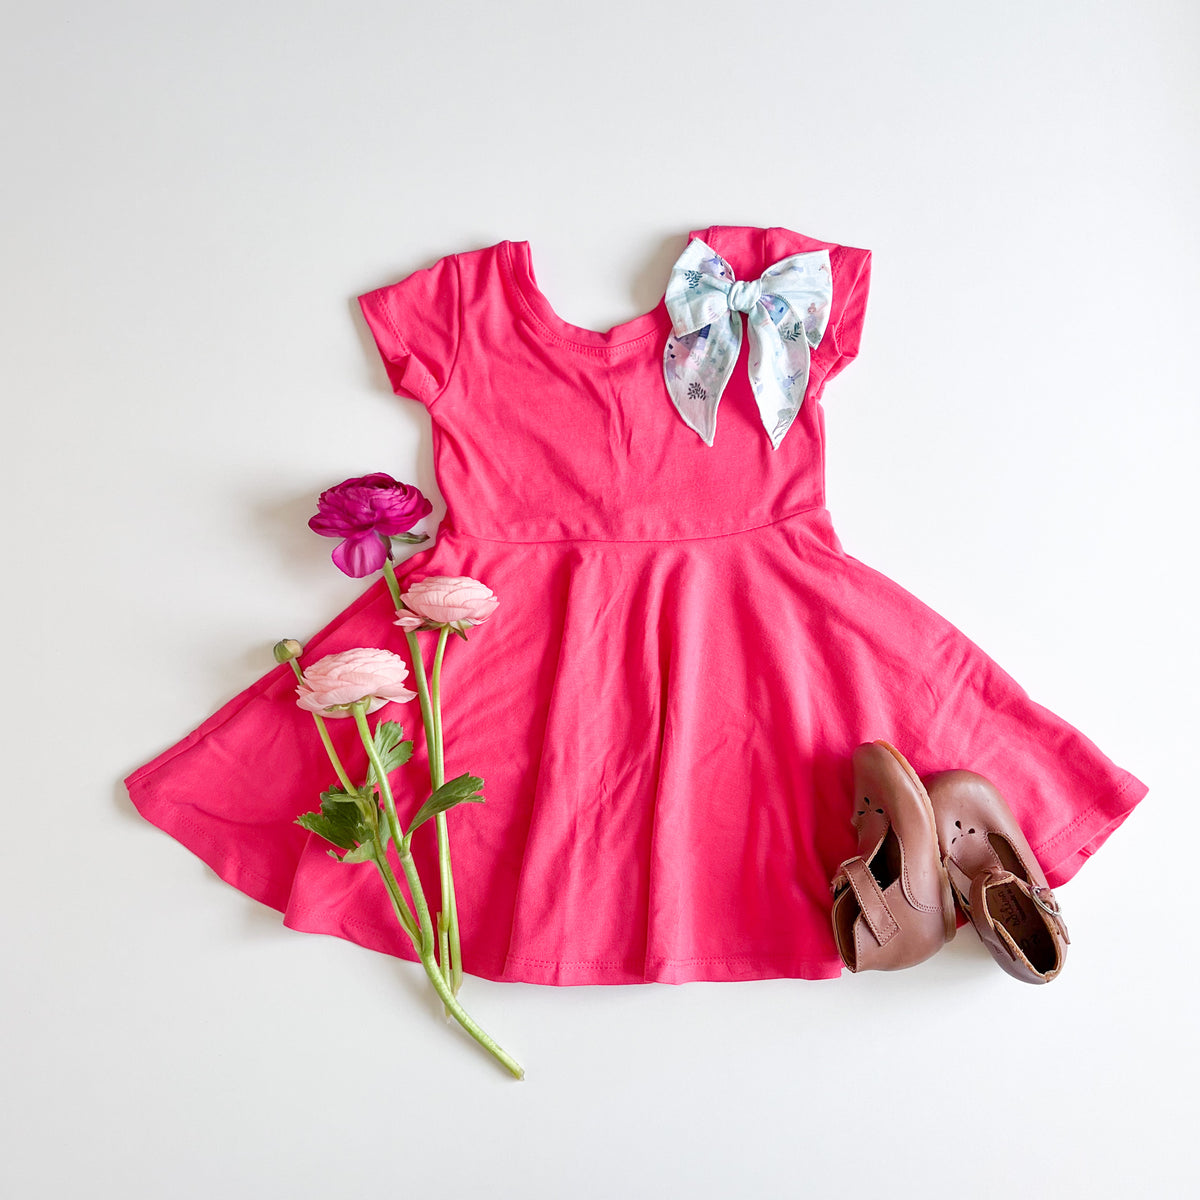 Elle Twirl Dress [Cap Sleeve] in 'Pink Punch' - Ready To Ship